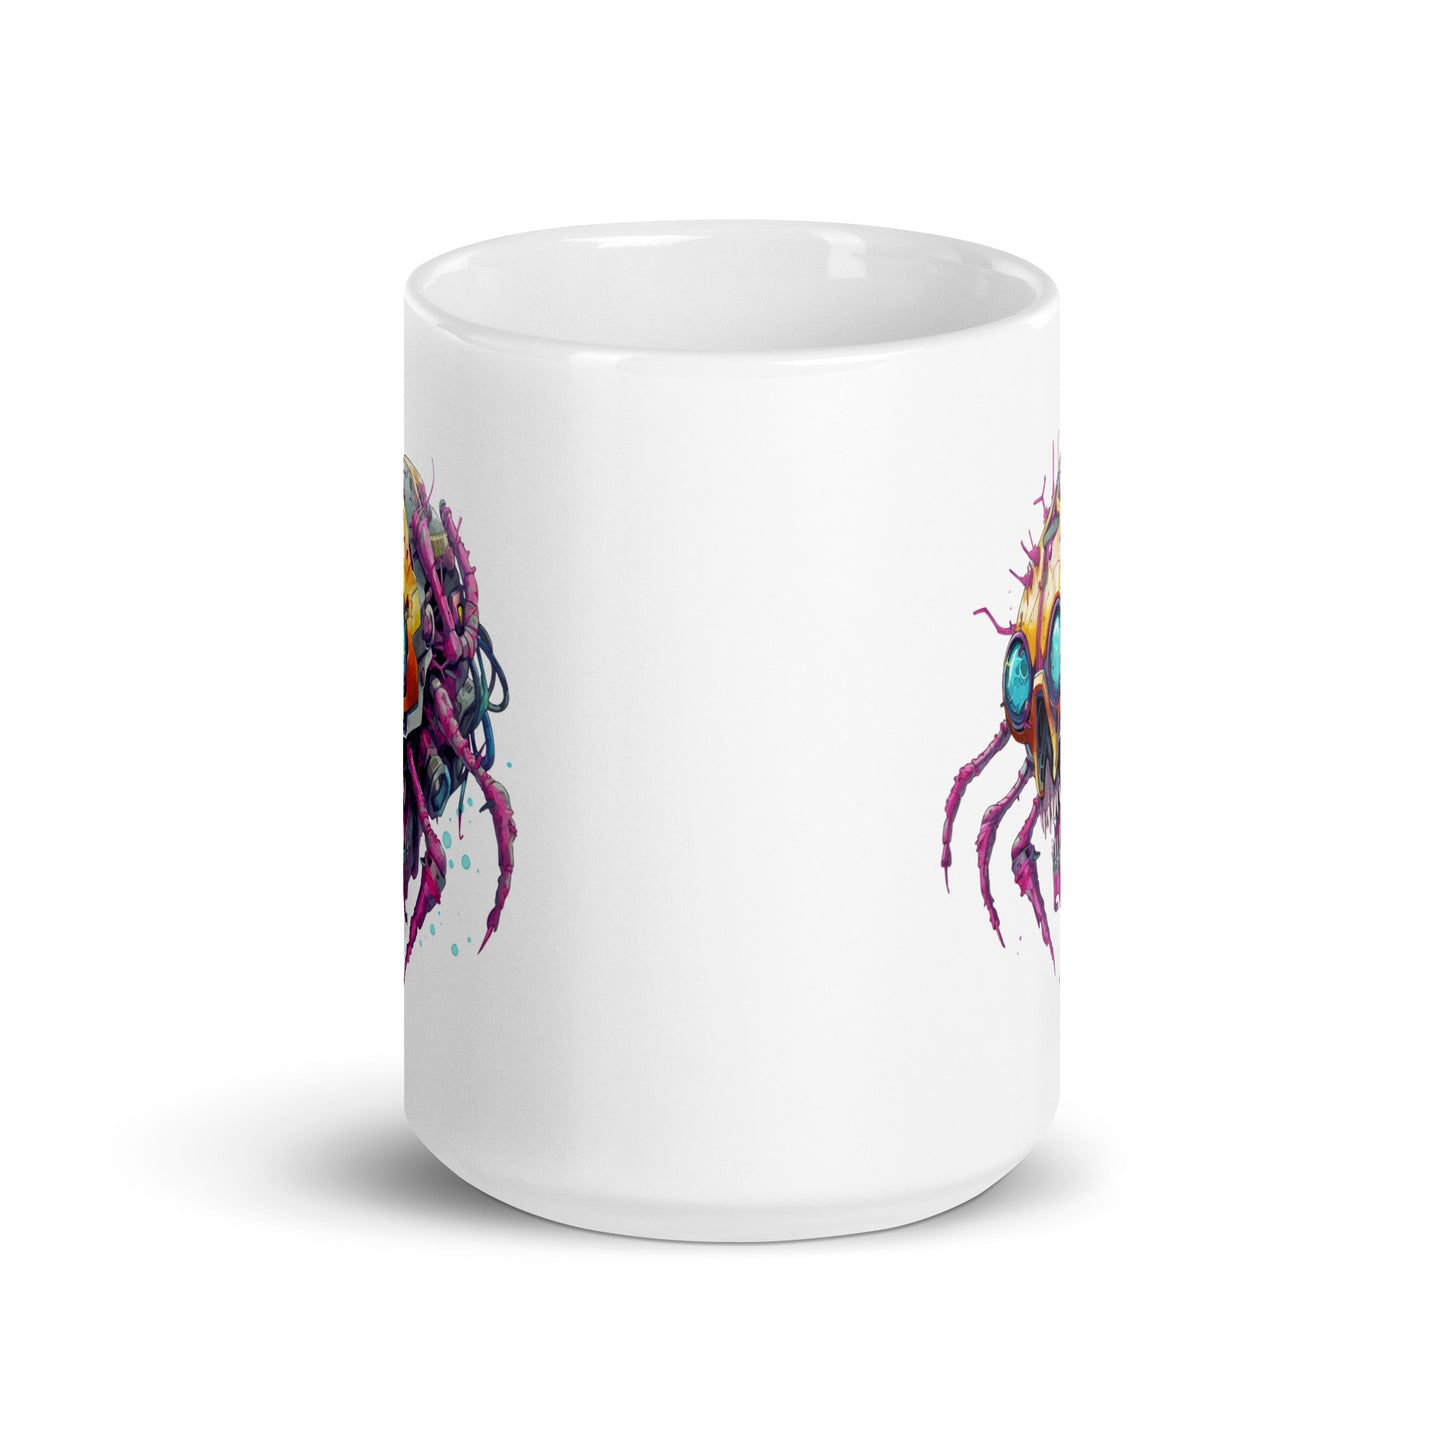 Crab cyber monster, Blue eyes, Detailed cyberpunk illustration, Neon electric colors, Electronic spider zombie - White glossy mug